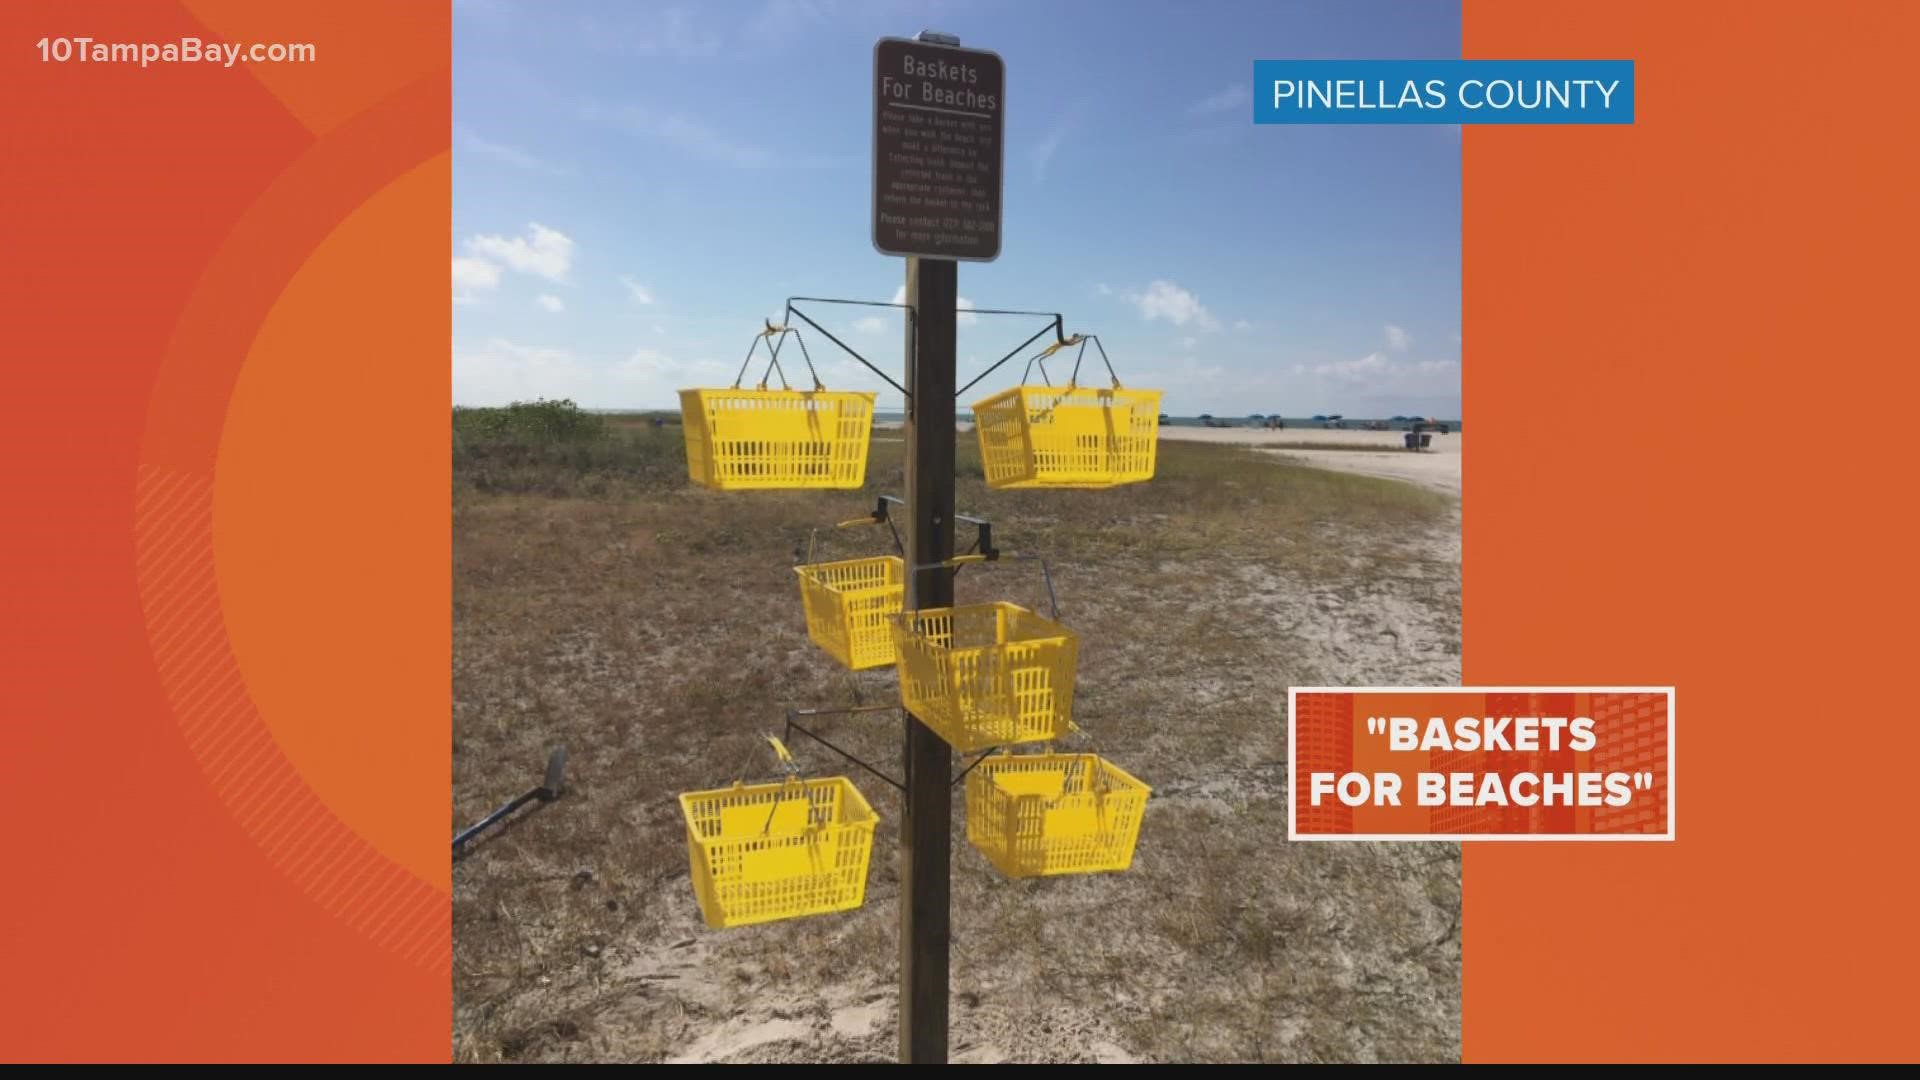 It's an easy way for beachgoers to lend a helping hand to keep our beaches beautiful.